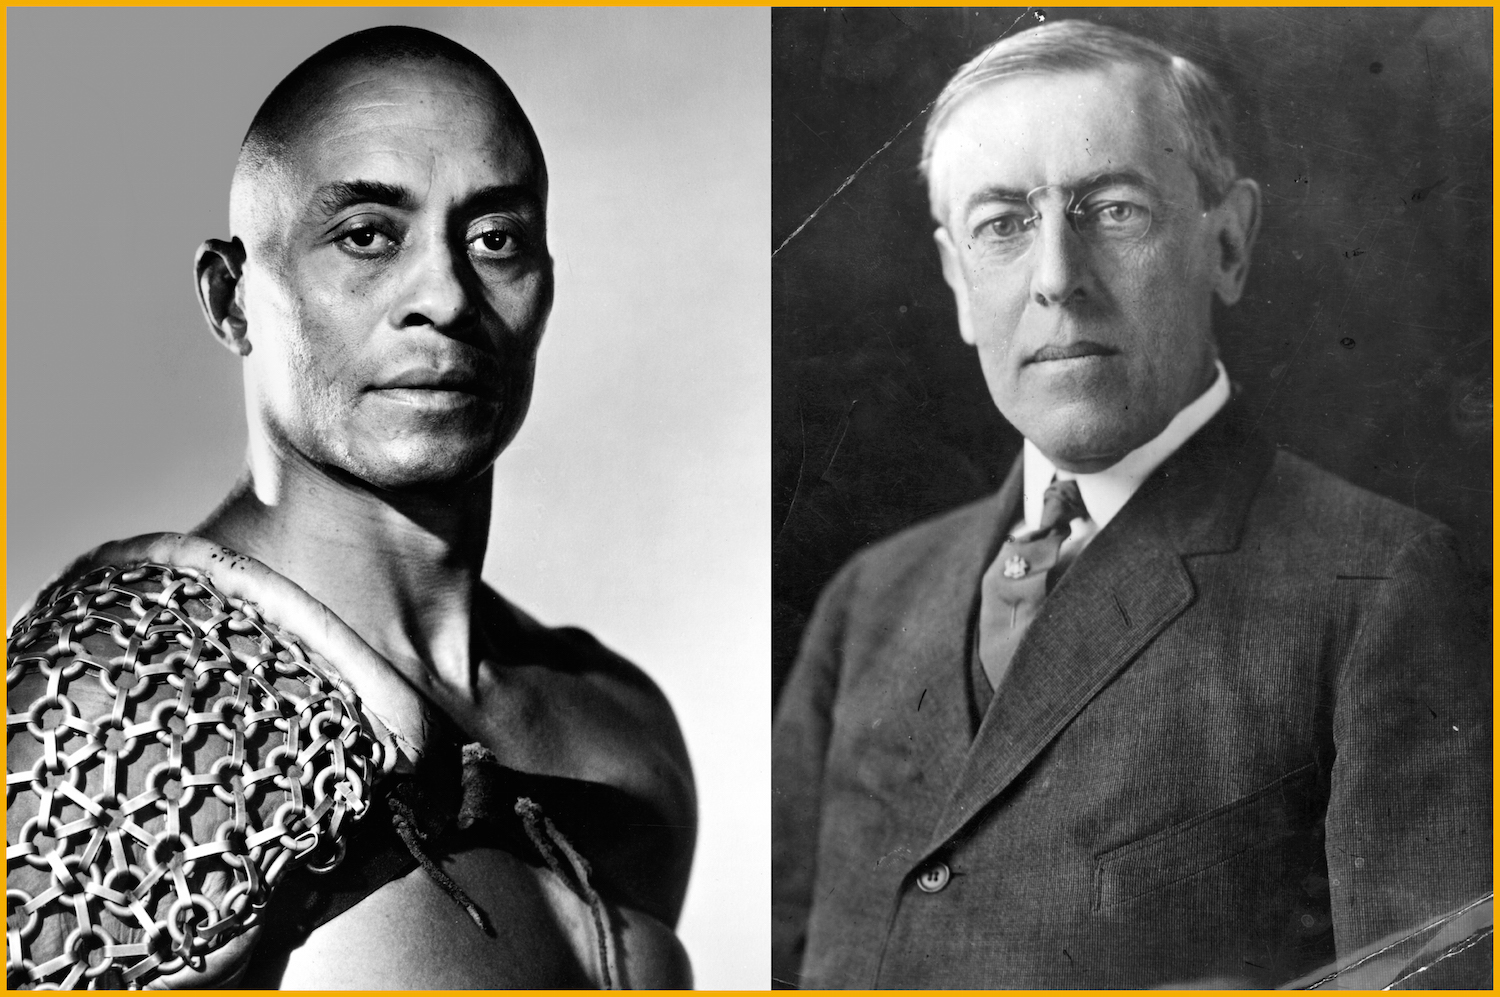 American actor Woody Strode in Stanley Kubrick's film 'Spartacus' (L) and the person after whom he was named: Woodrow Wilson, the 28th President of the United States of America. (John D. Kisch—Separate Cinema Archive/Getty Images (L) and Hulton Archive/Getty Images (R))